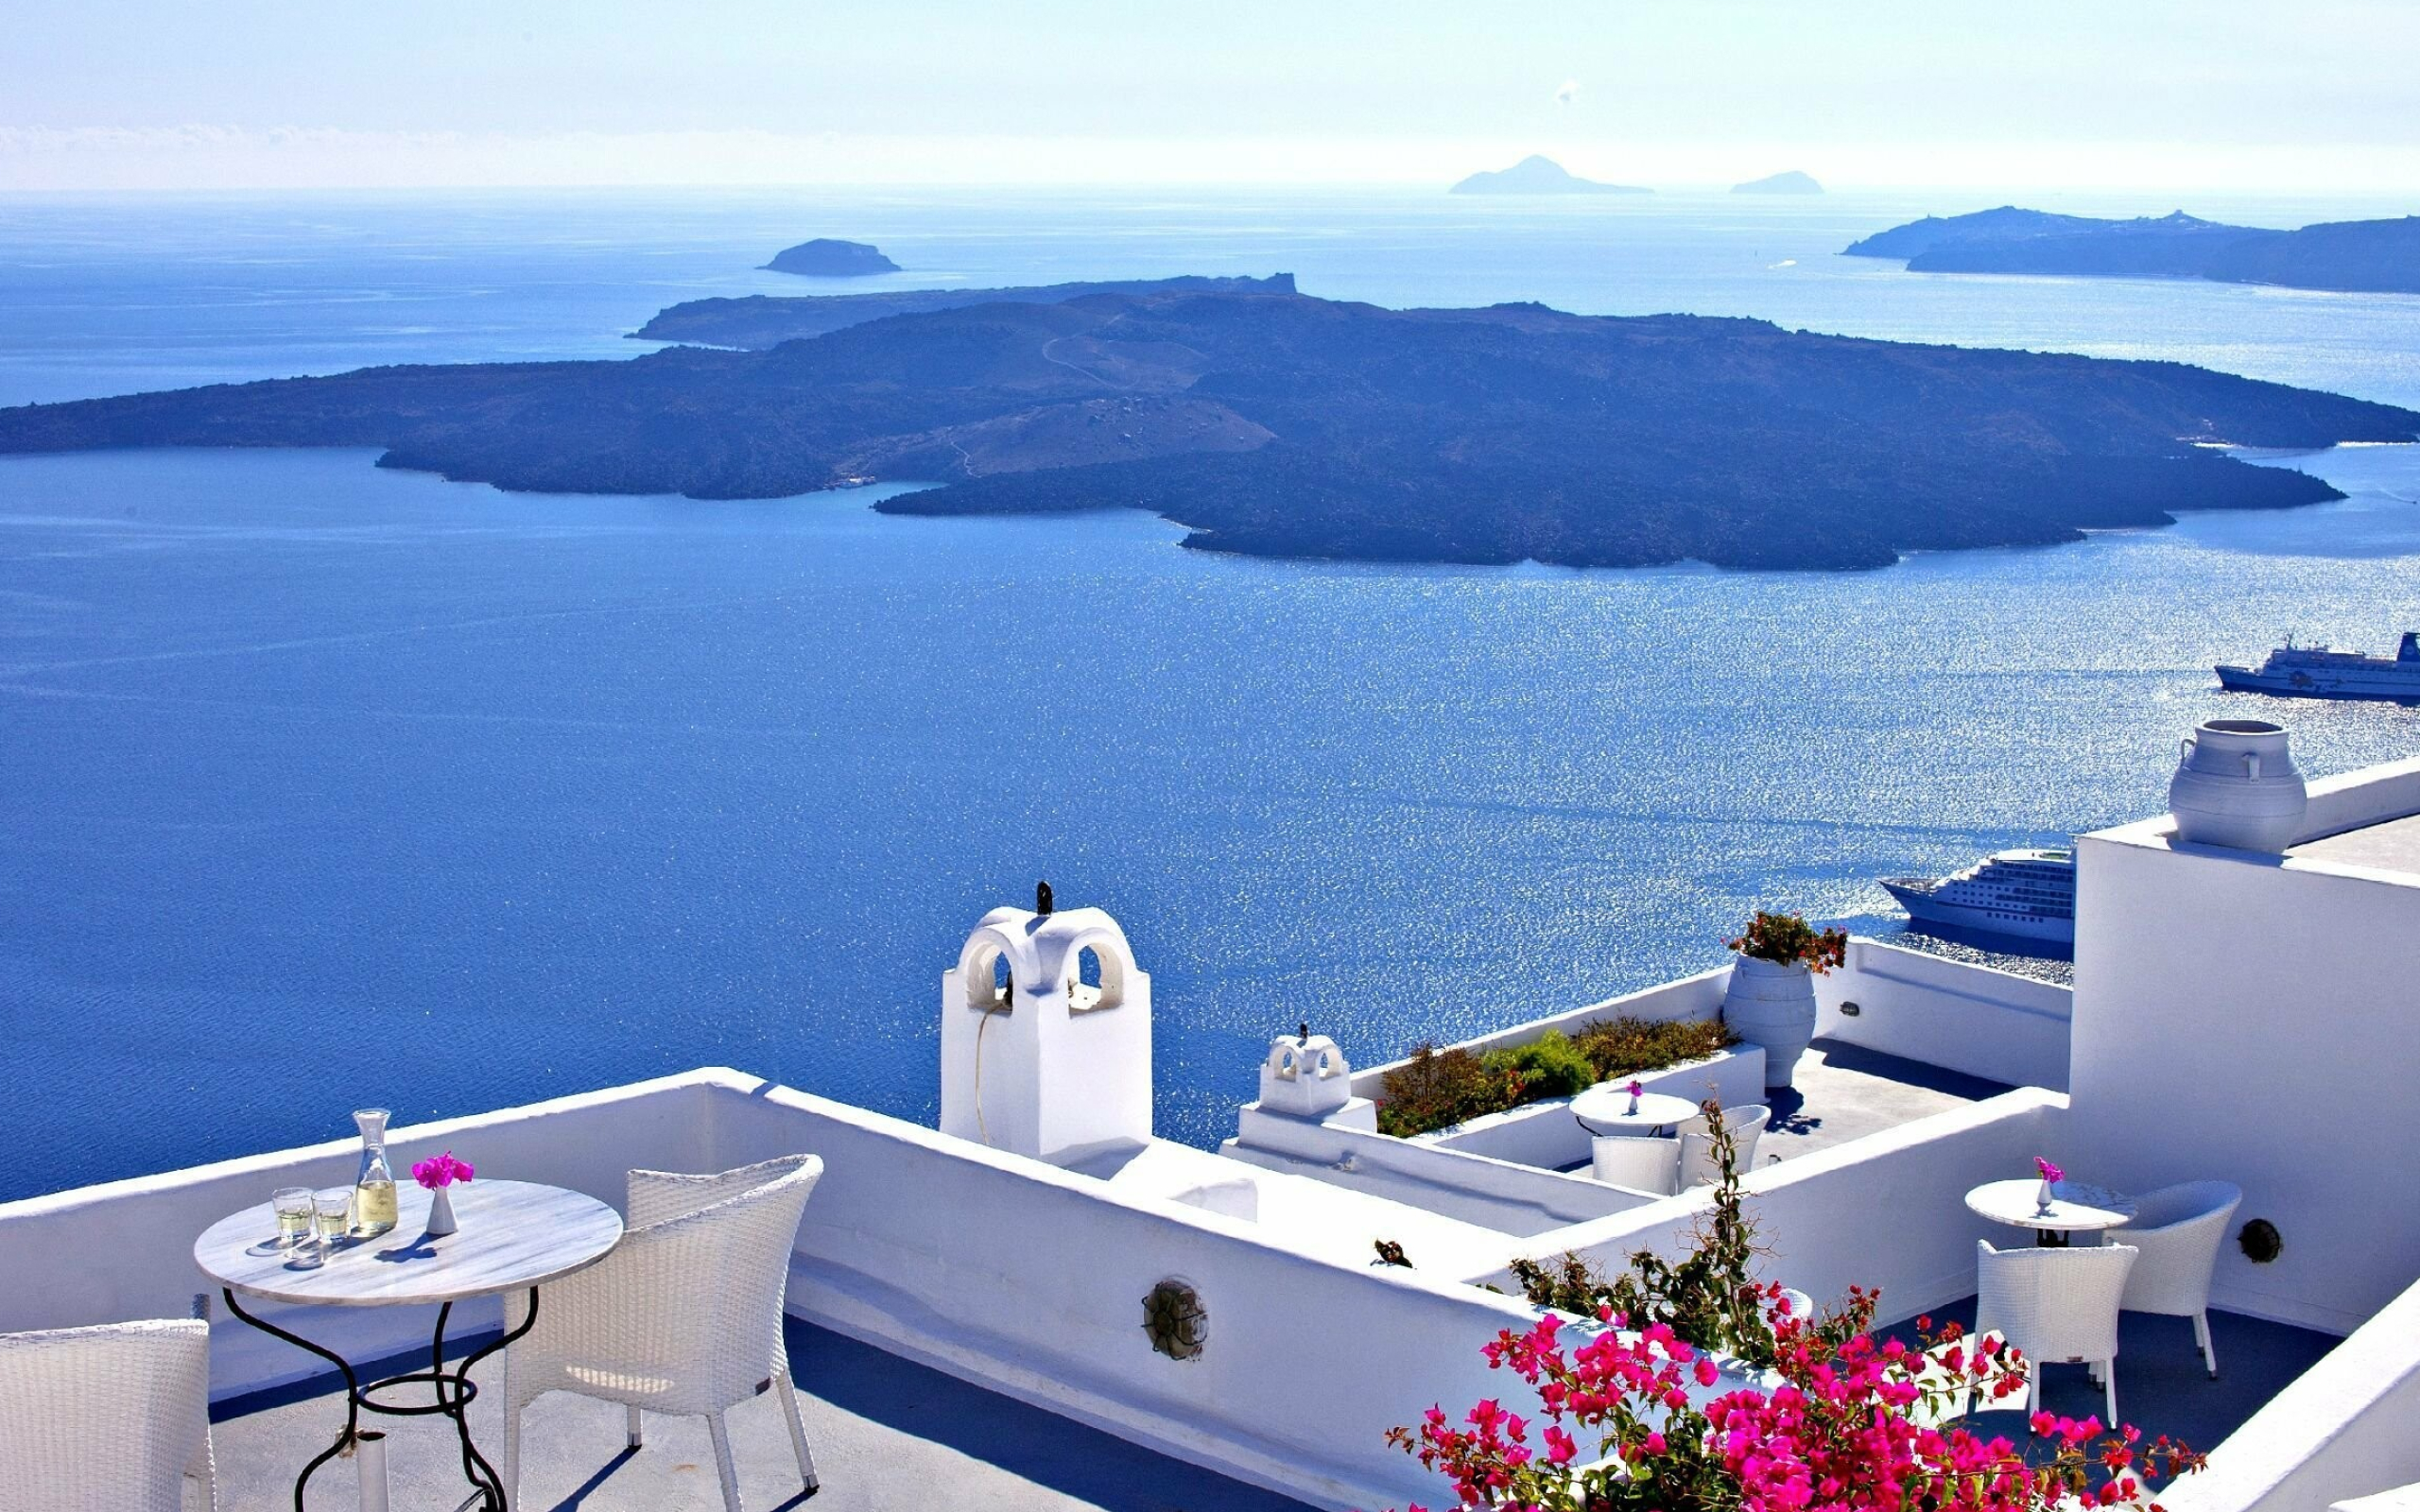 Greece: Santorini, The country is considered the cradle of Western civilization. 2560x1600 HD Background.